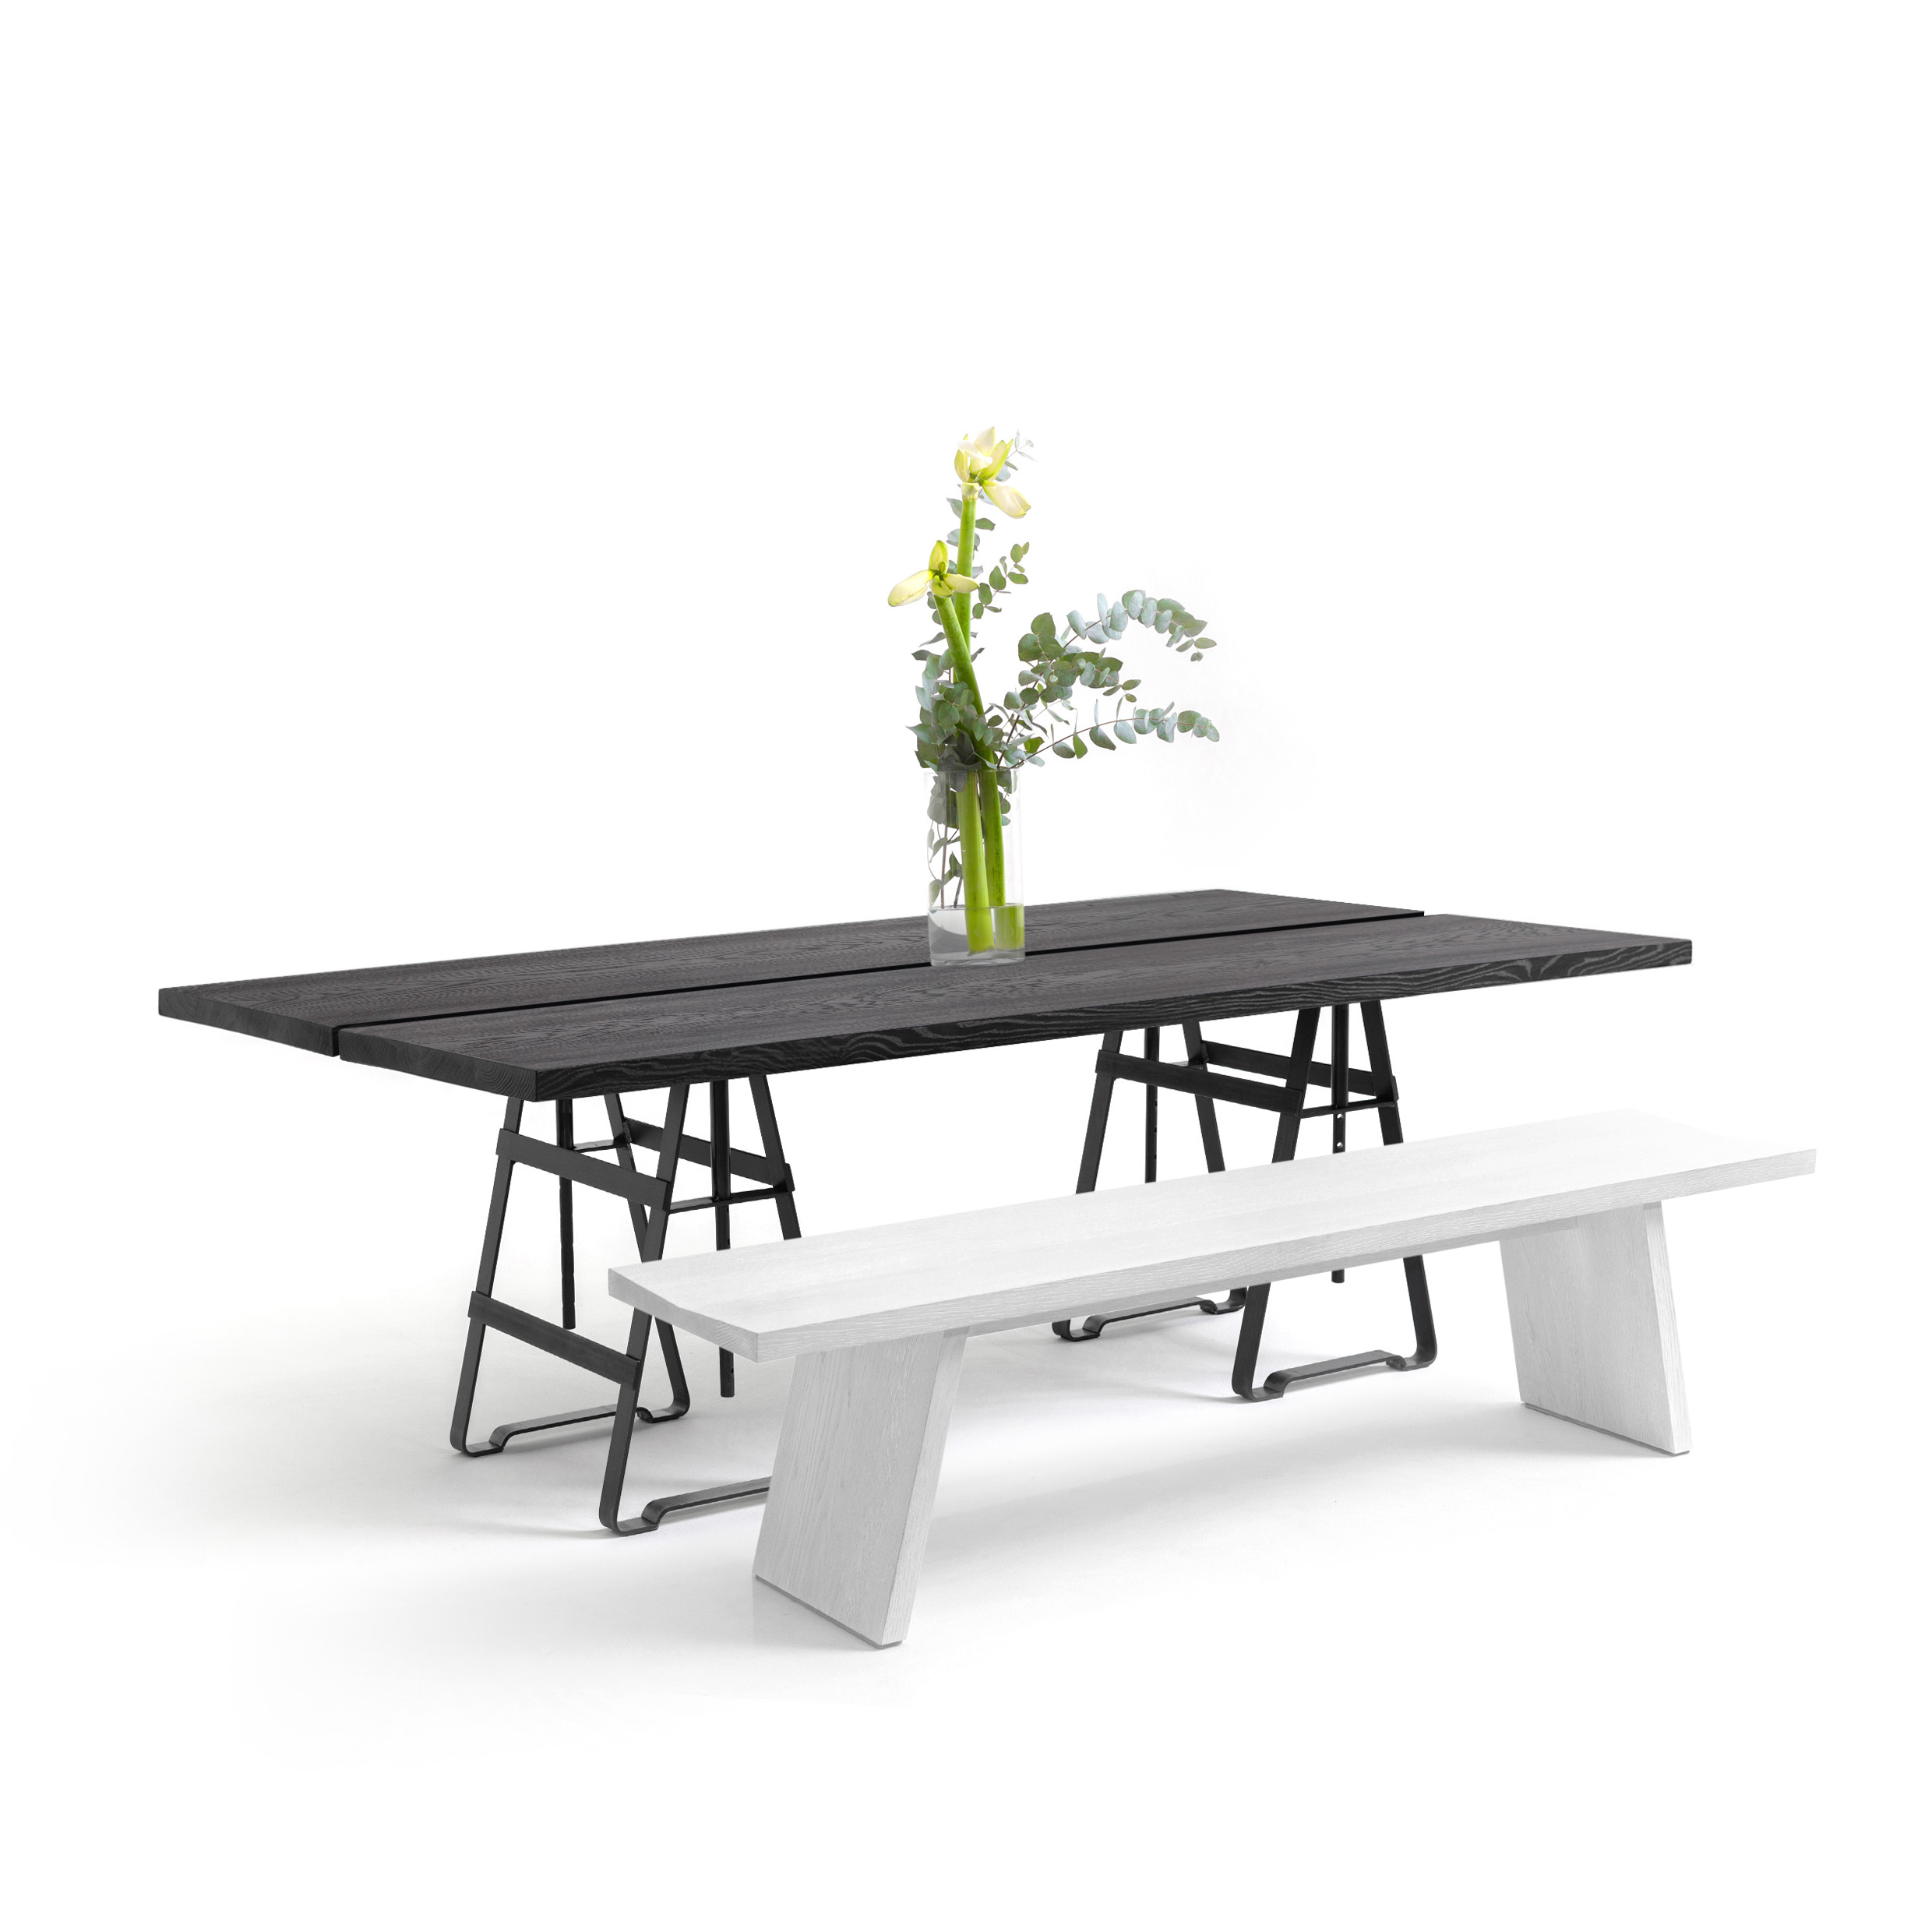 FORM EXCLUSIVE // JOON - IN-/OUTDOOR TABLE | BLACK CARED - 240CM X 45CM X 5CM - PAINT MONKEY BLACK